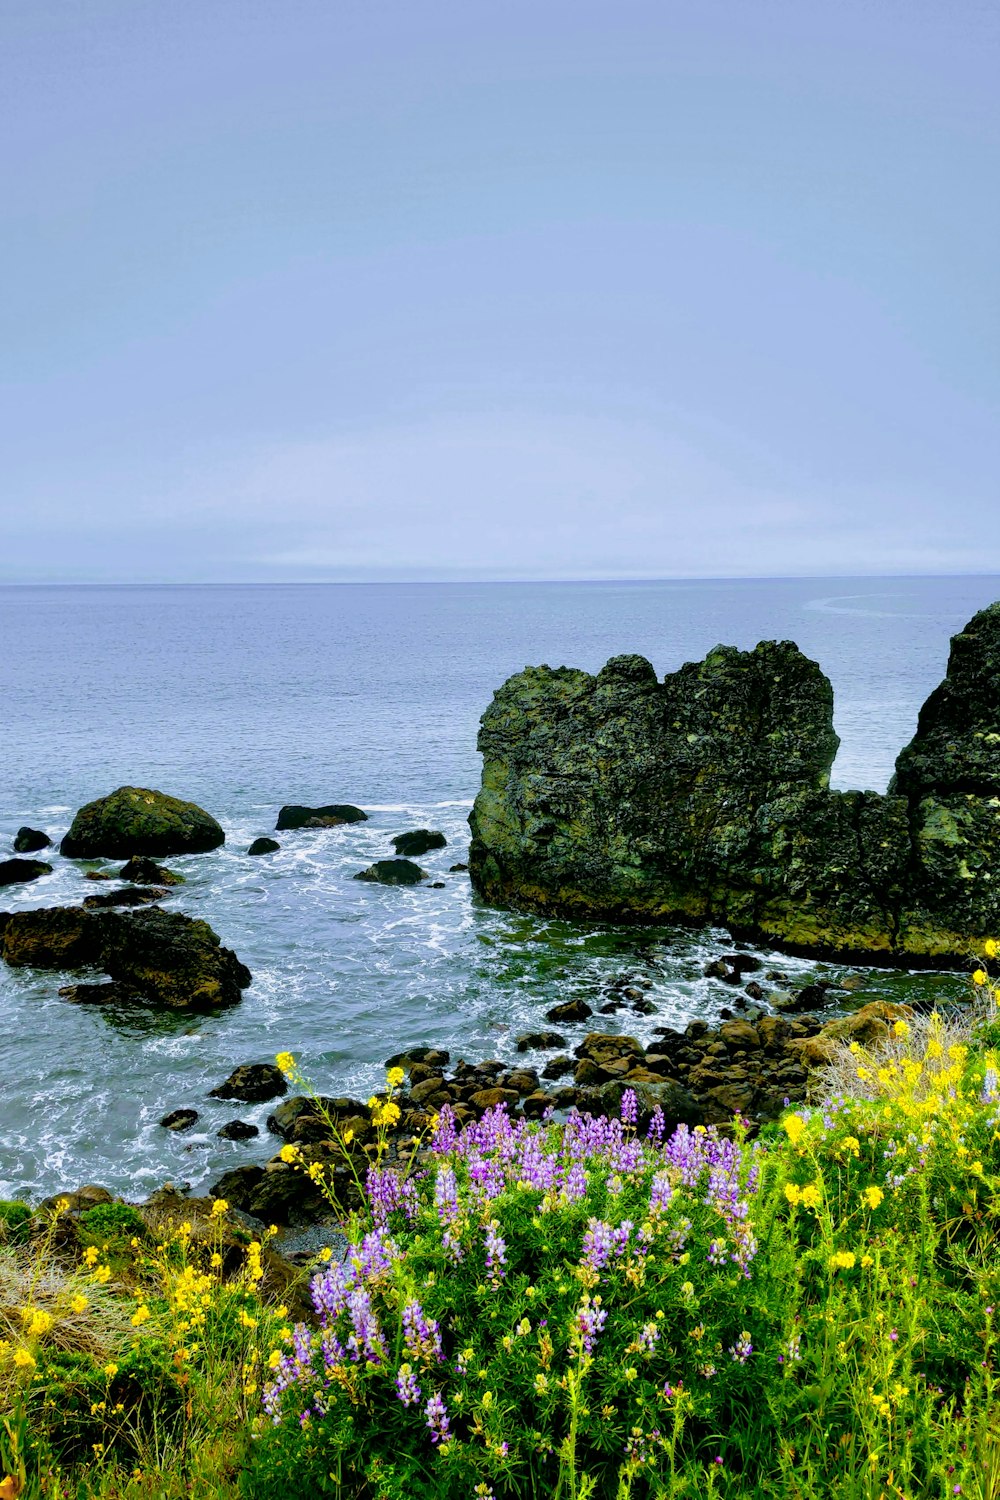 a view of a body of water with rocks and flowers in the foreground